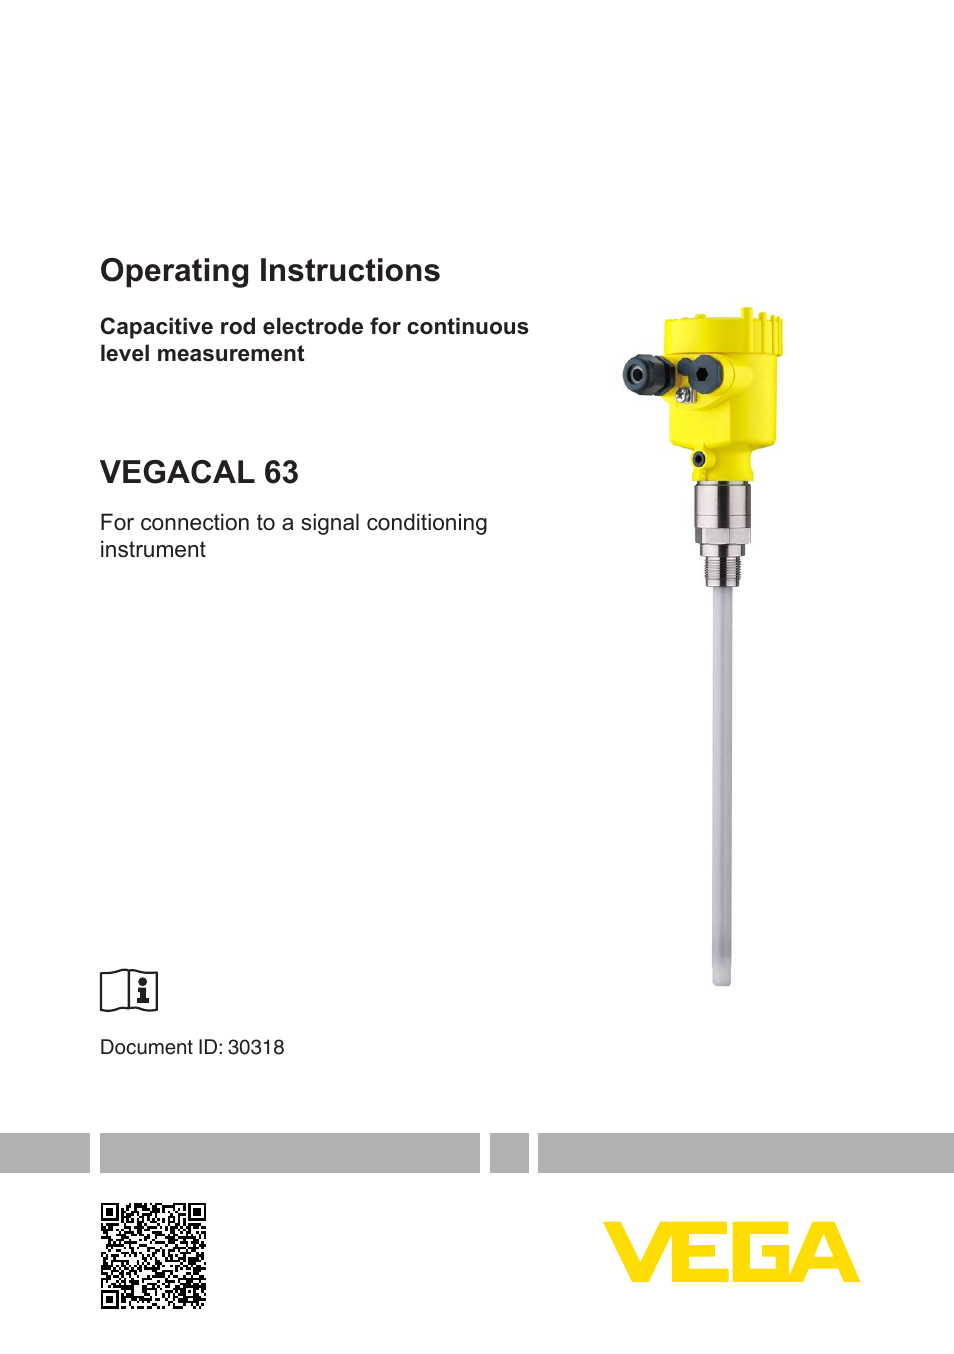 VEGACAL 63 For connection to a signal conditioning instrument